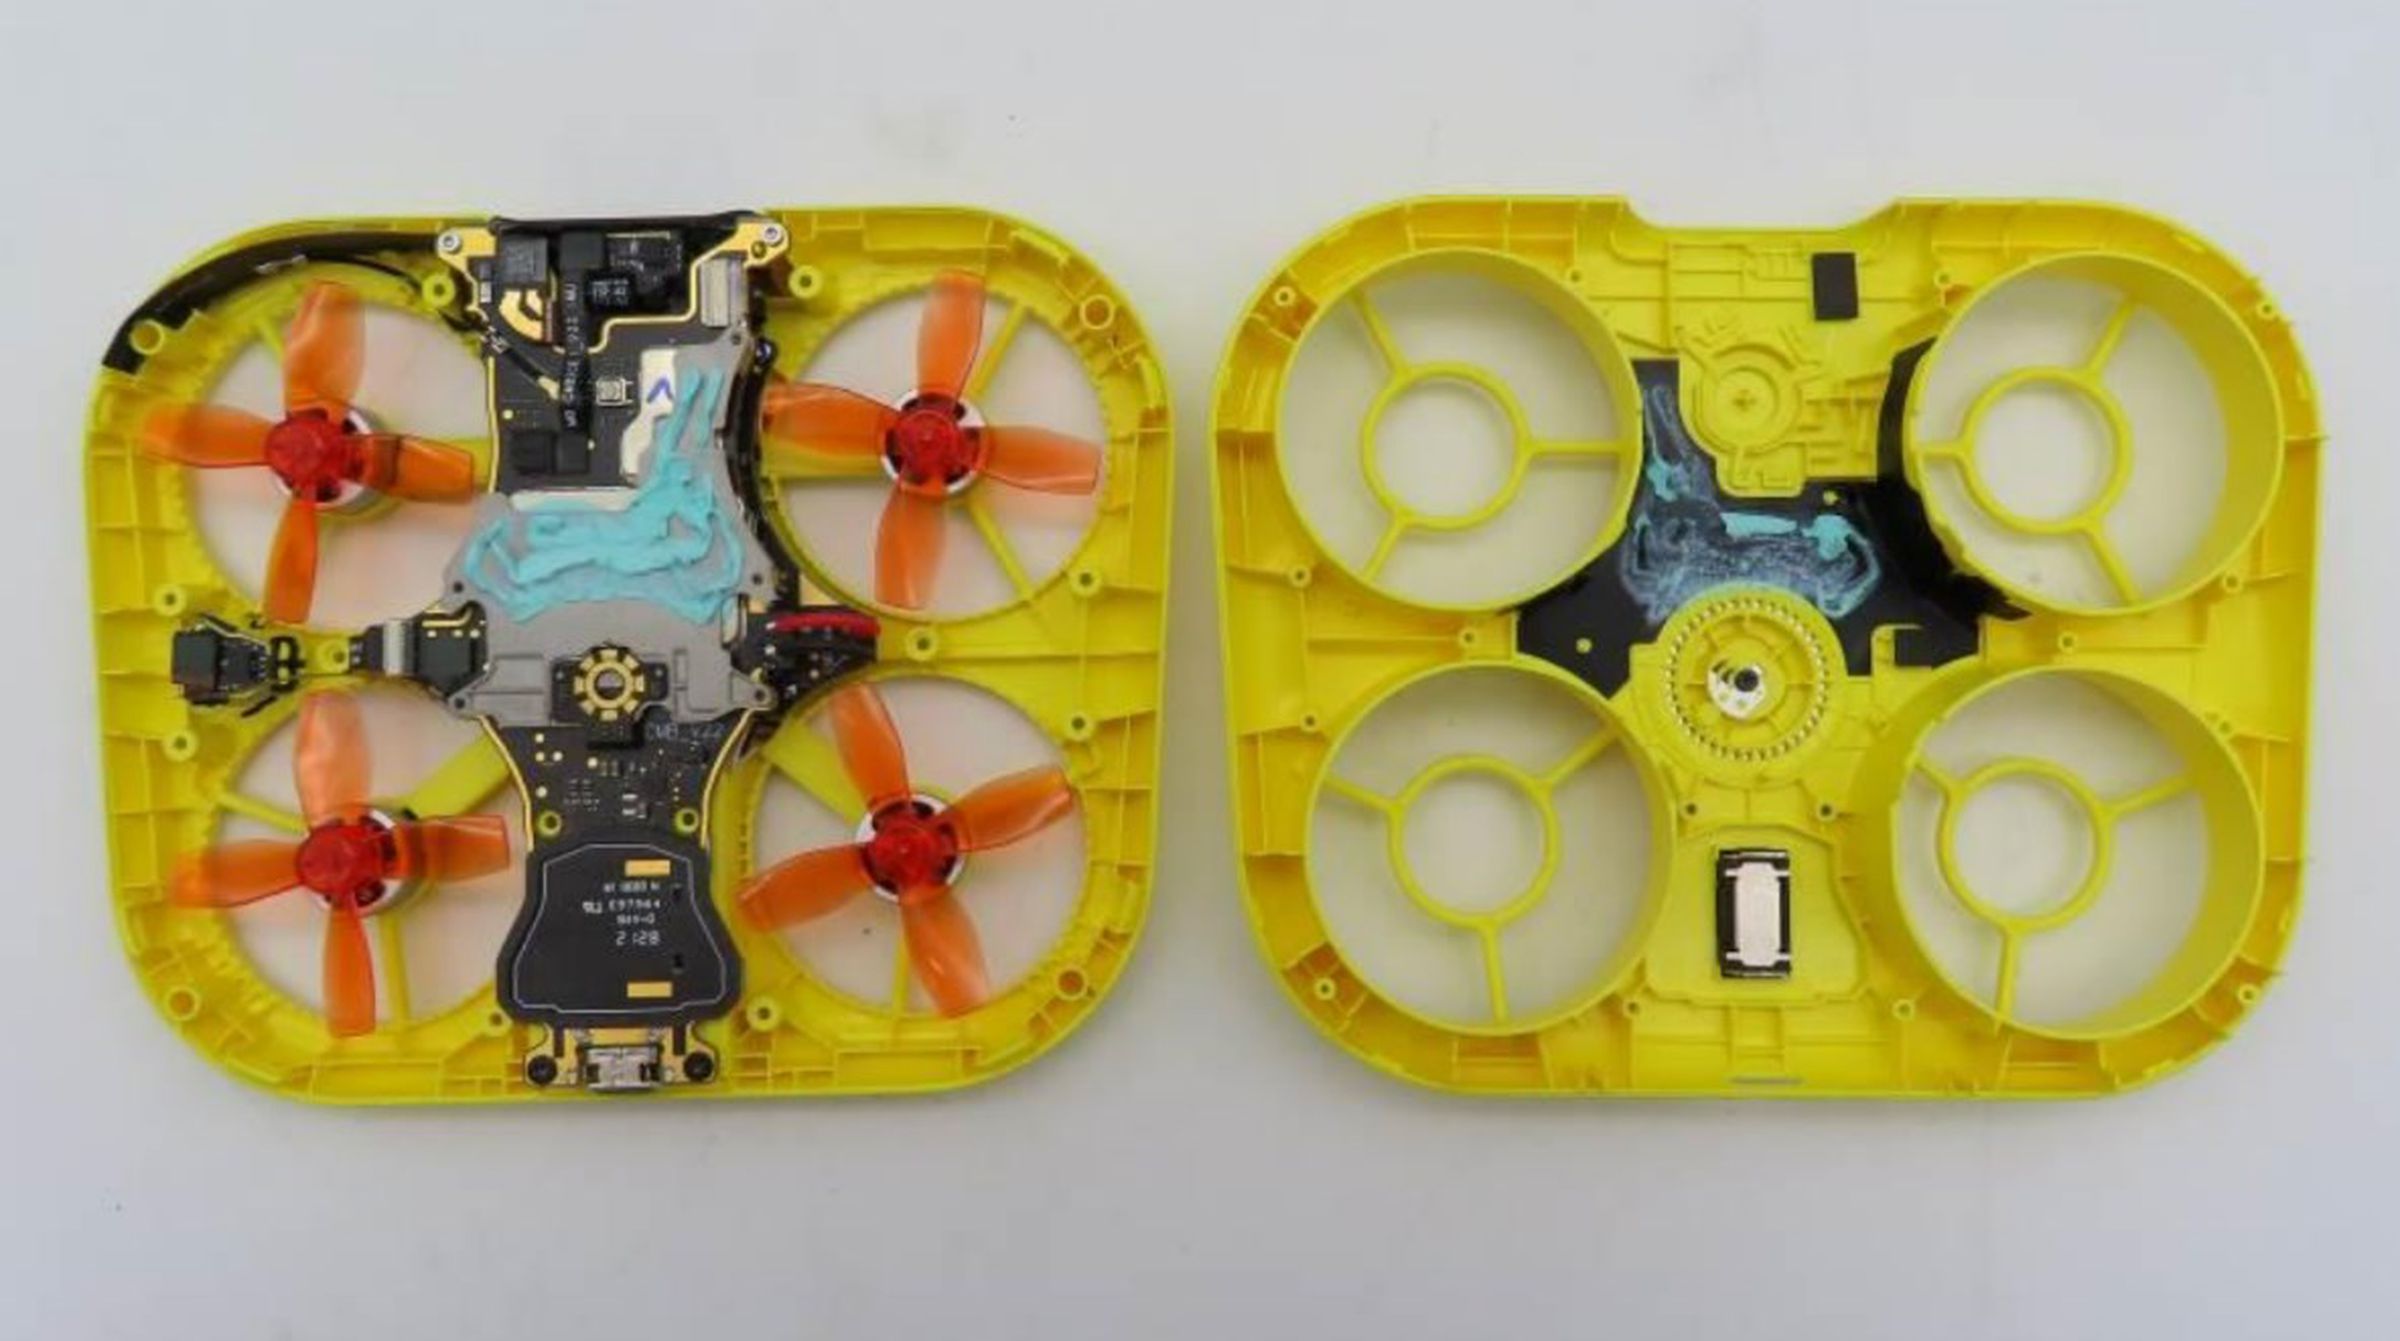 The inside of the Pixy drone.